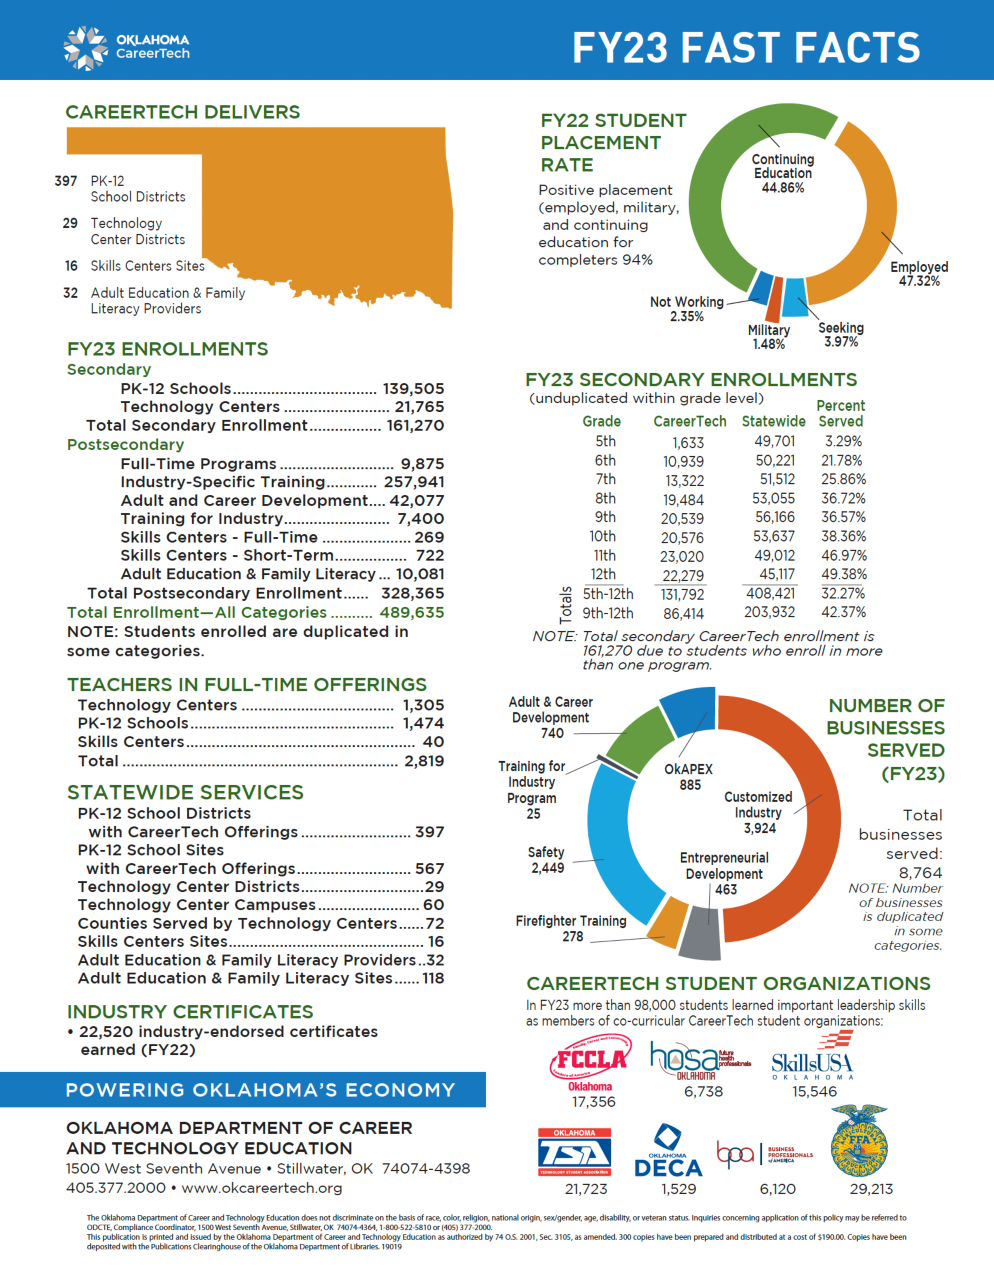 CareerTech's FY23 Fast Facts flier itemizing enrollments in programs at tech centers, CTSO memberships, etc.